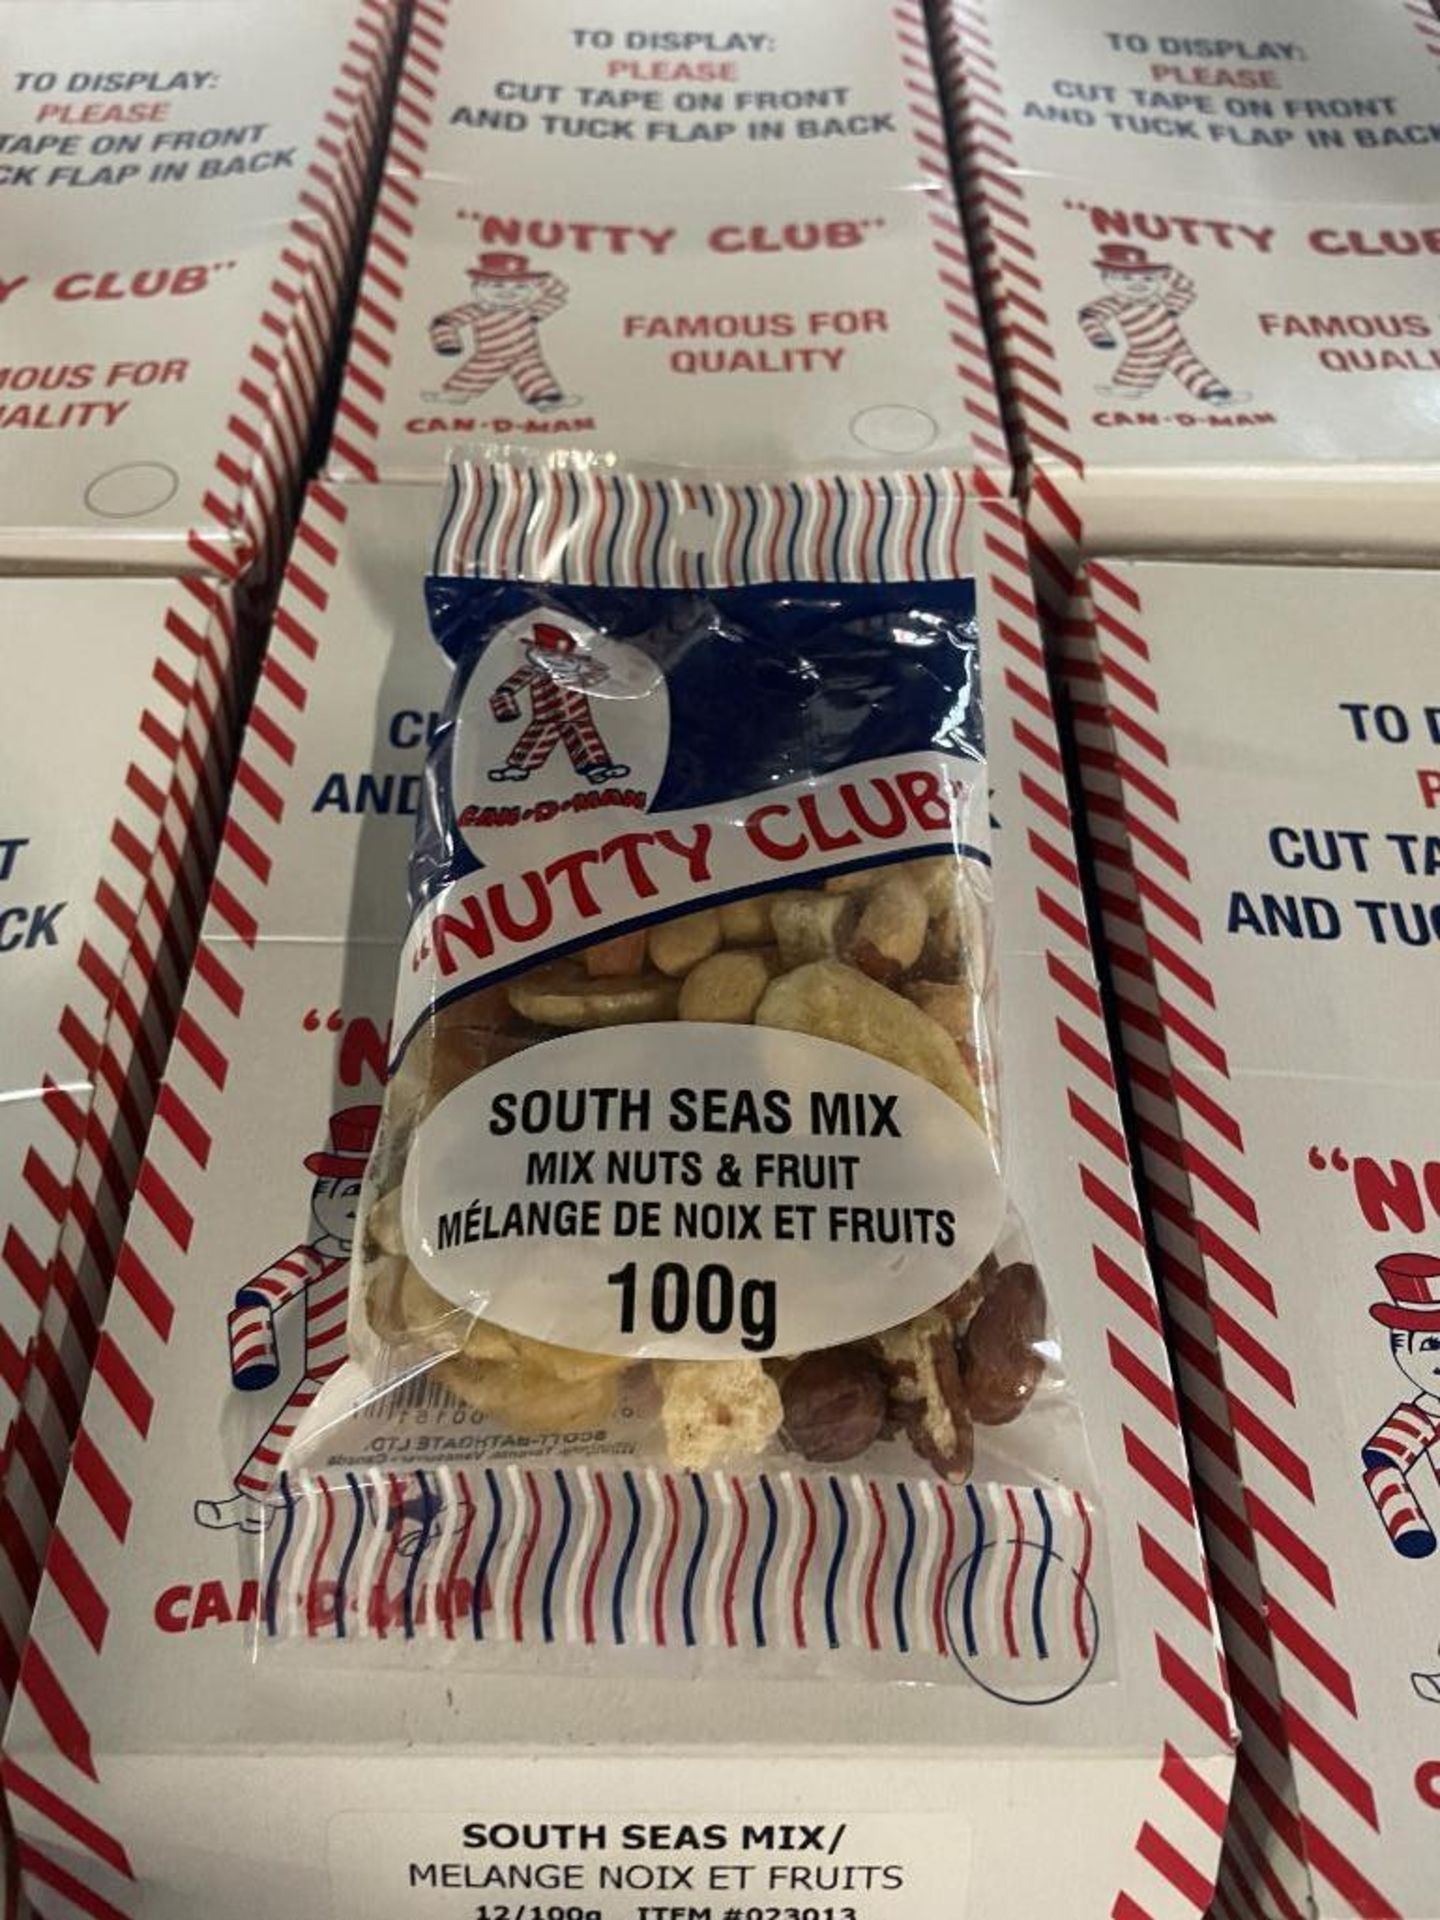 (33) BOXES OF NUTTY CLUB SOUTH SEAS MIX, 12/100G PER BOX - Image 2 of 4